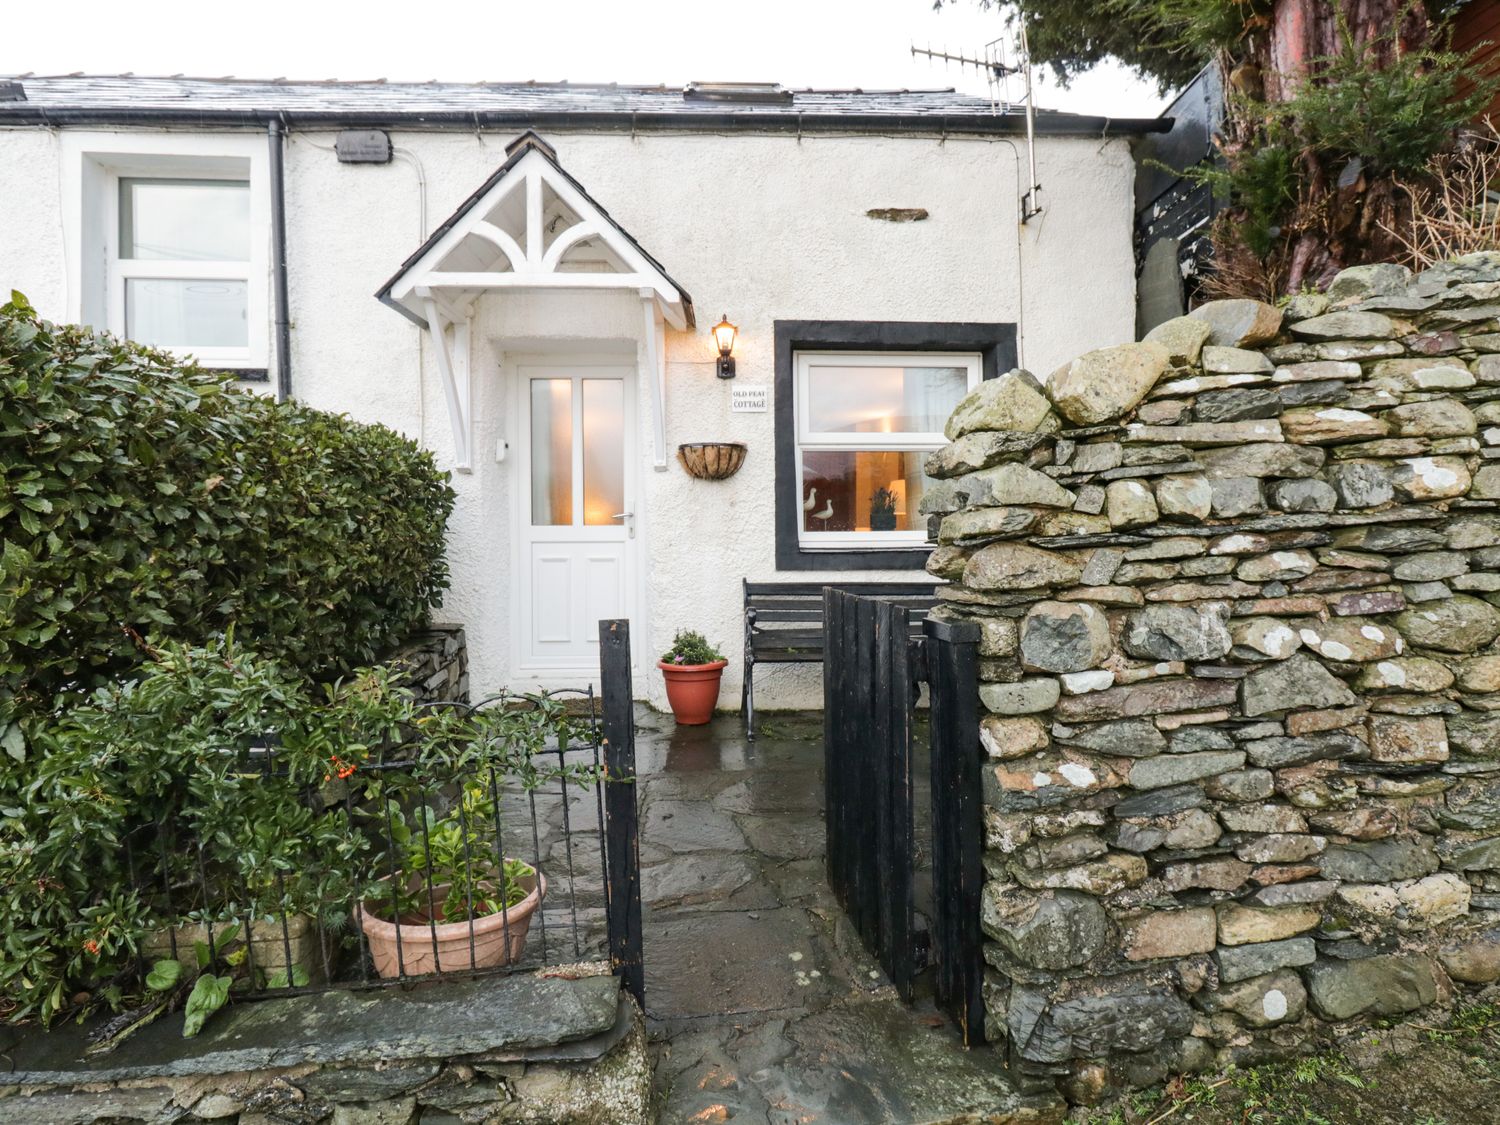 The Old Peat Cottage - Lake District - 1077187 - photo 1